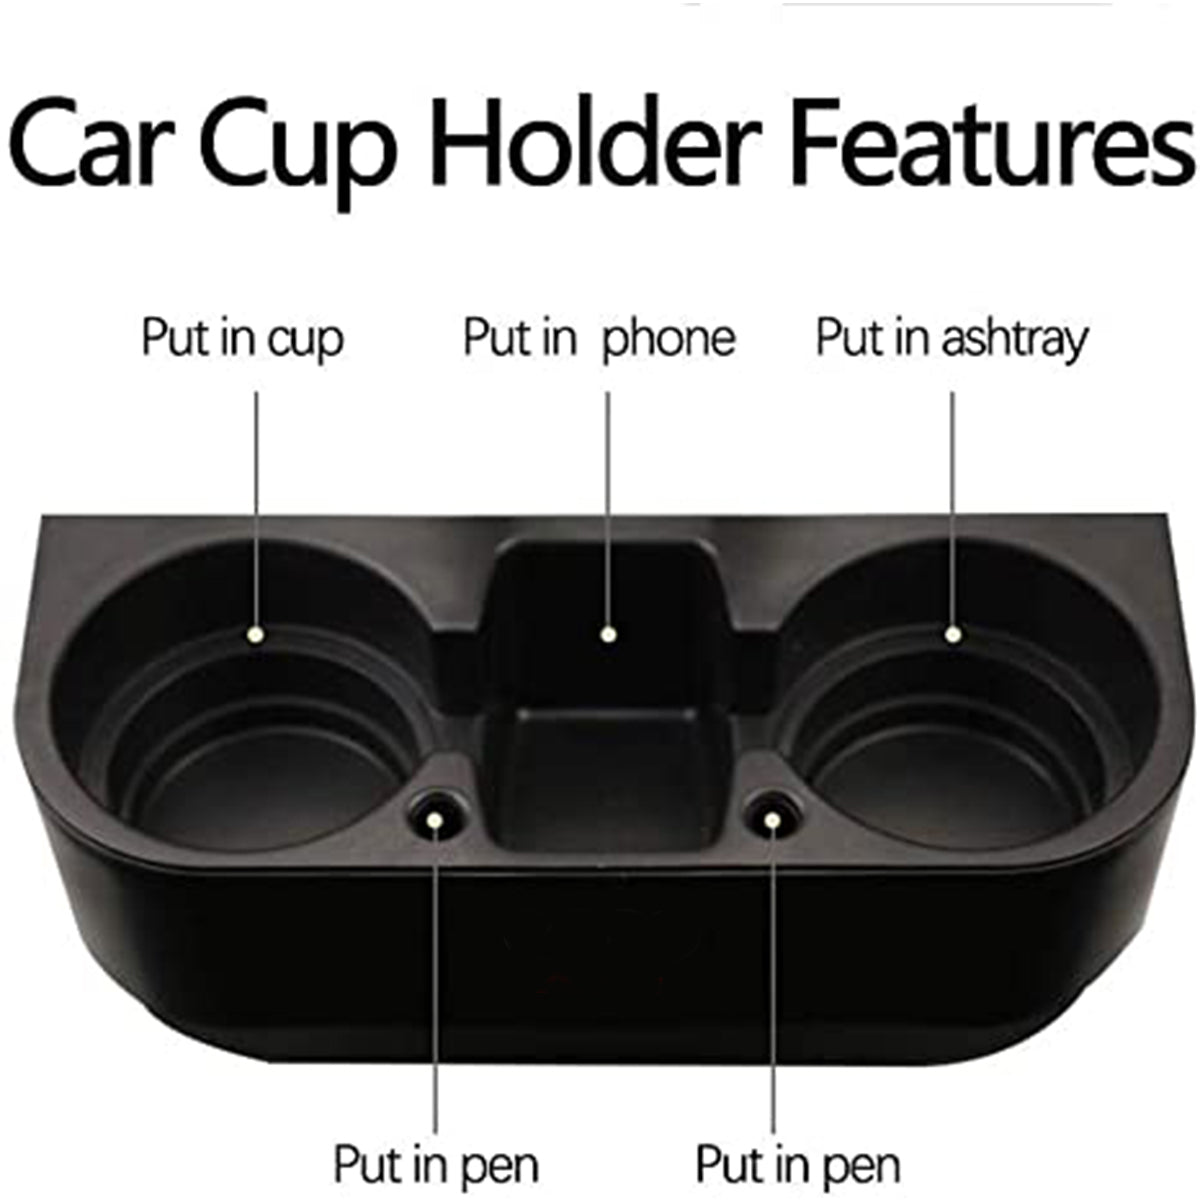 Delicate Leather Cup Holder Portable Multifunction Vehicle Seat Cup Cell Phone Drinks Holder Box Car Interior Organizer, Custom For Your Cars, Car Accessories VE11995 - Delicate Leather